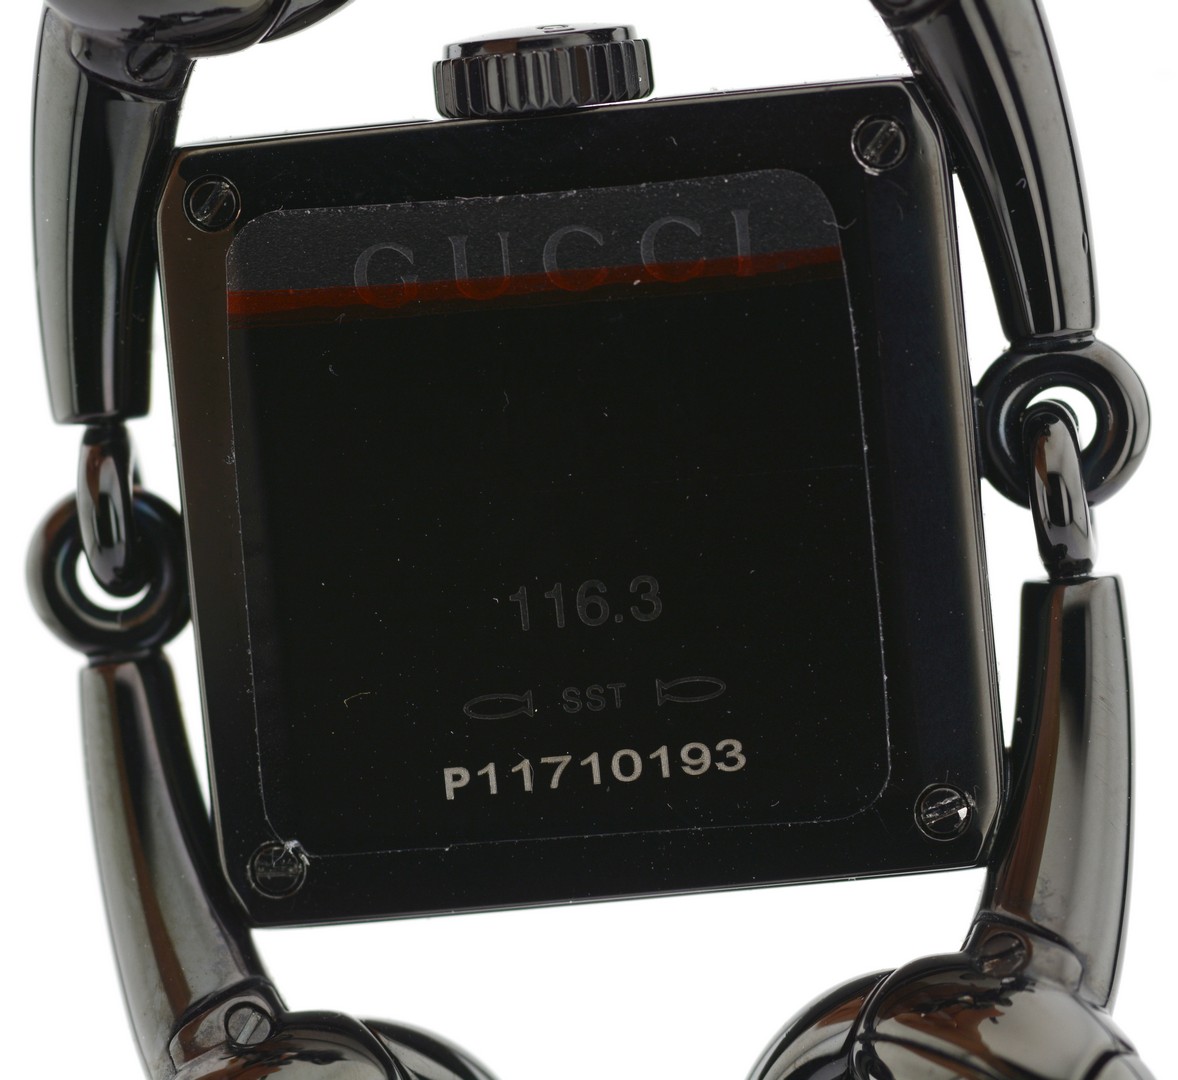 Gucci / 116.3 - Lady's Steel Wristwatch - Image 10 of 11